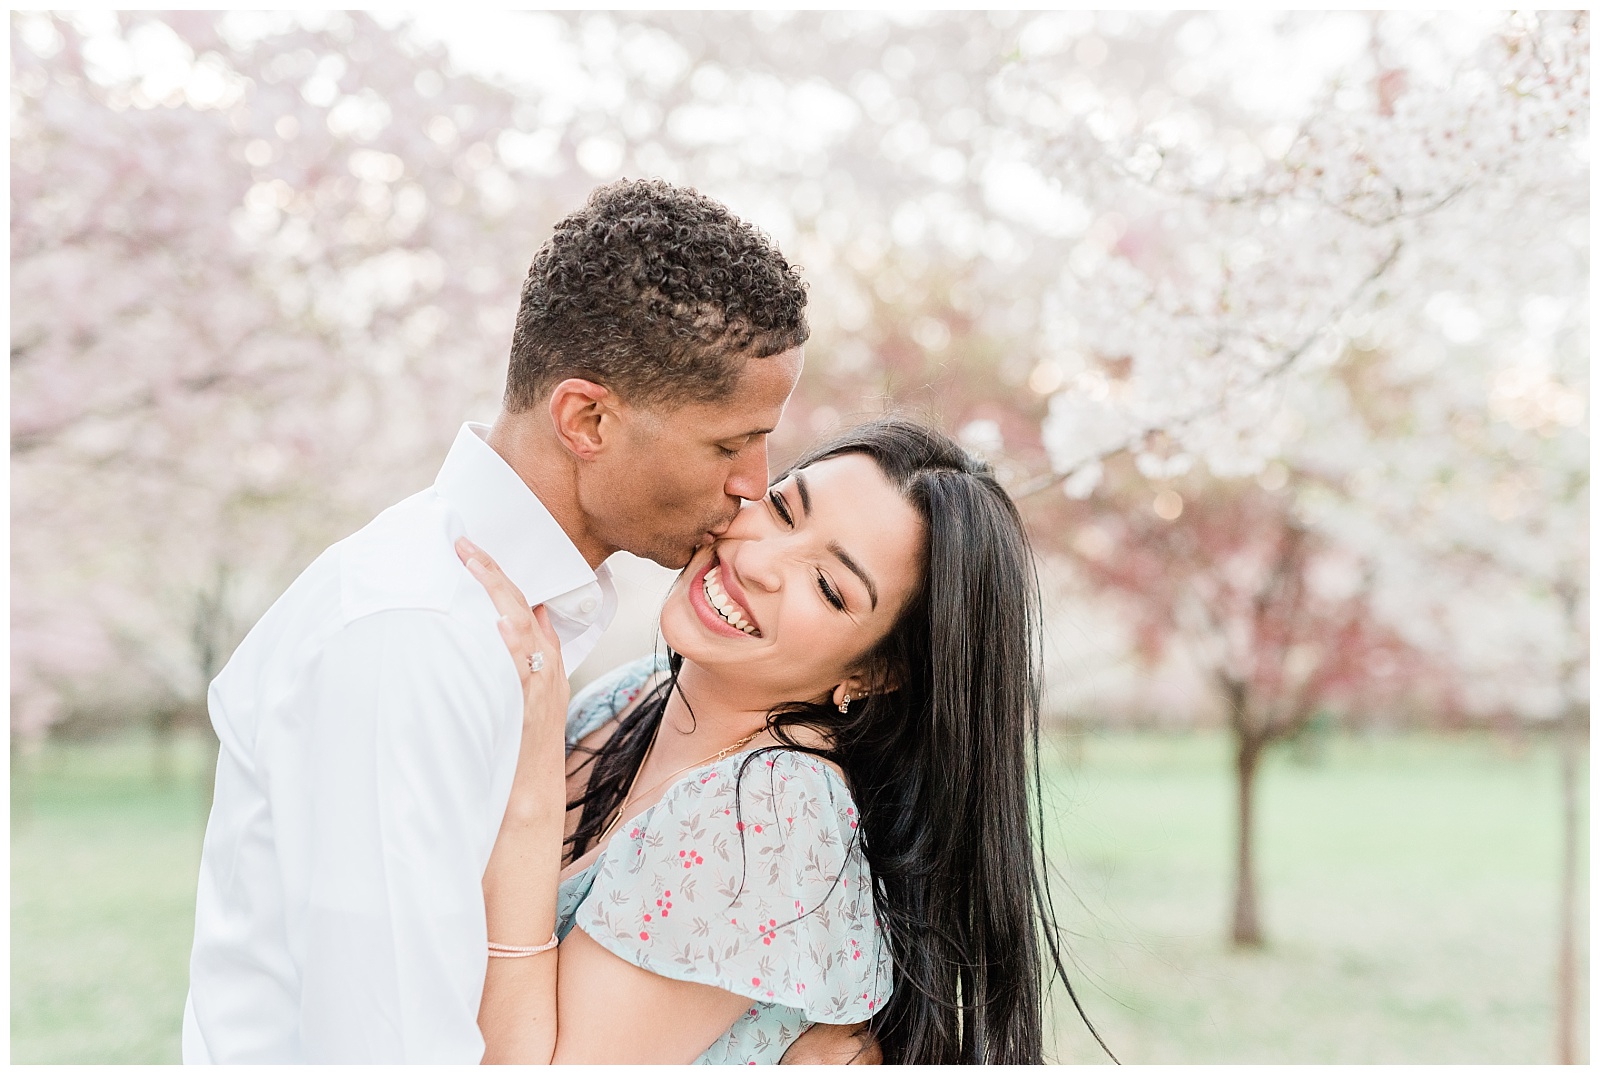 A man kisses his fiance on the cheek during a springtime engagement session.